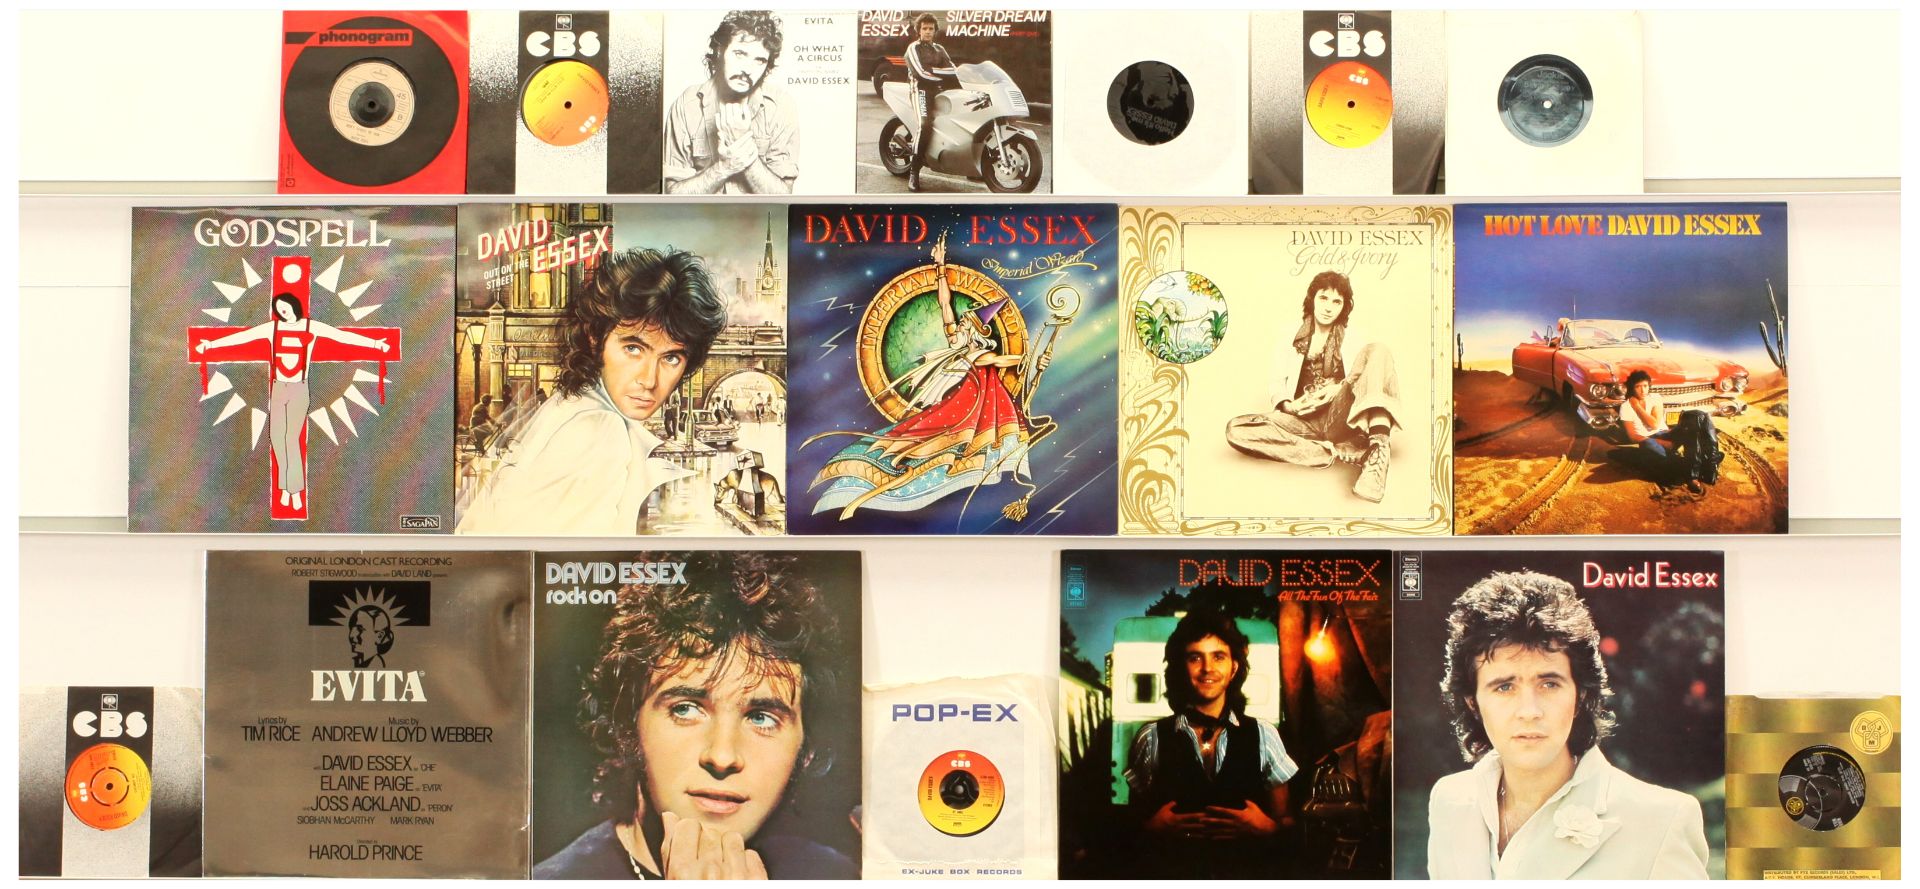 David Essex LPs, CDs and VHS tapes